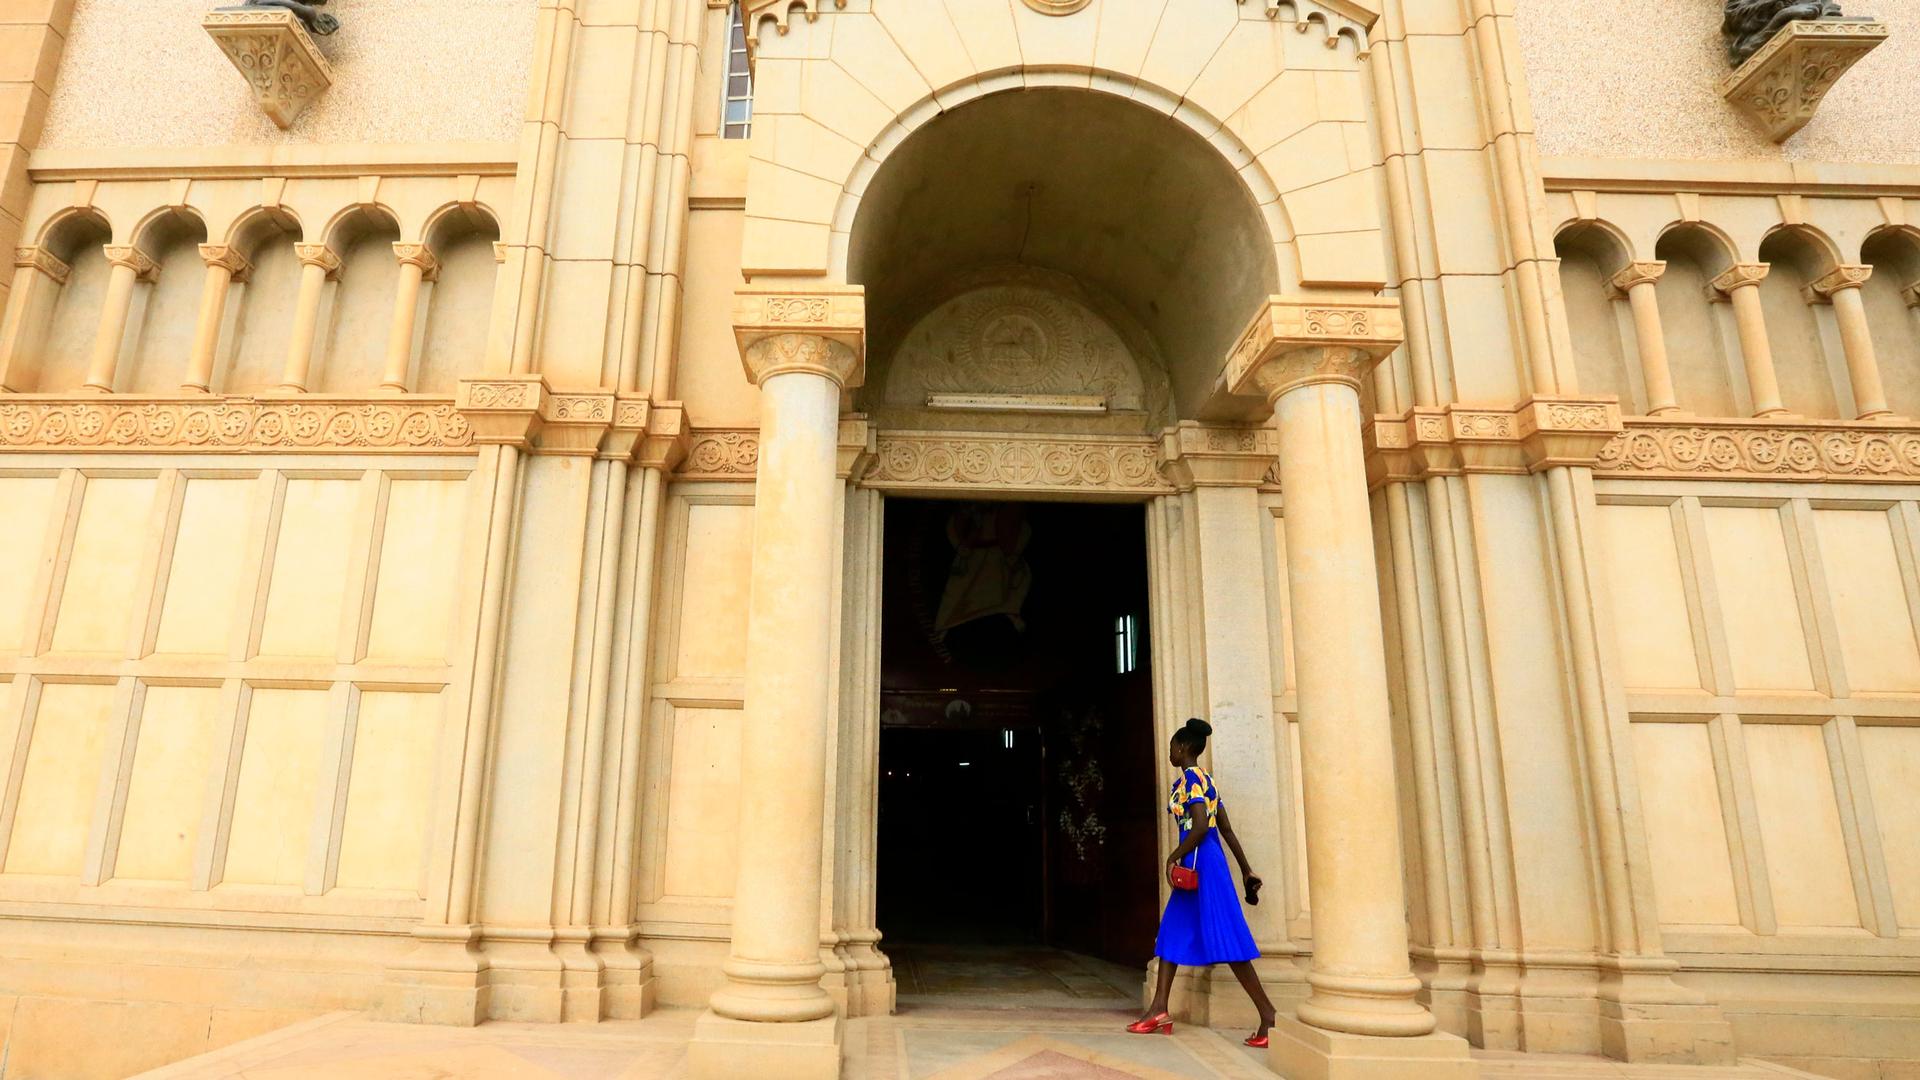 A woman wearing a blue dress and red shoes walks into the tan-colored stone entrance to St. Matthew’s Catholic Cathedral